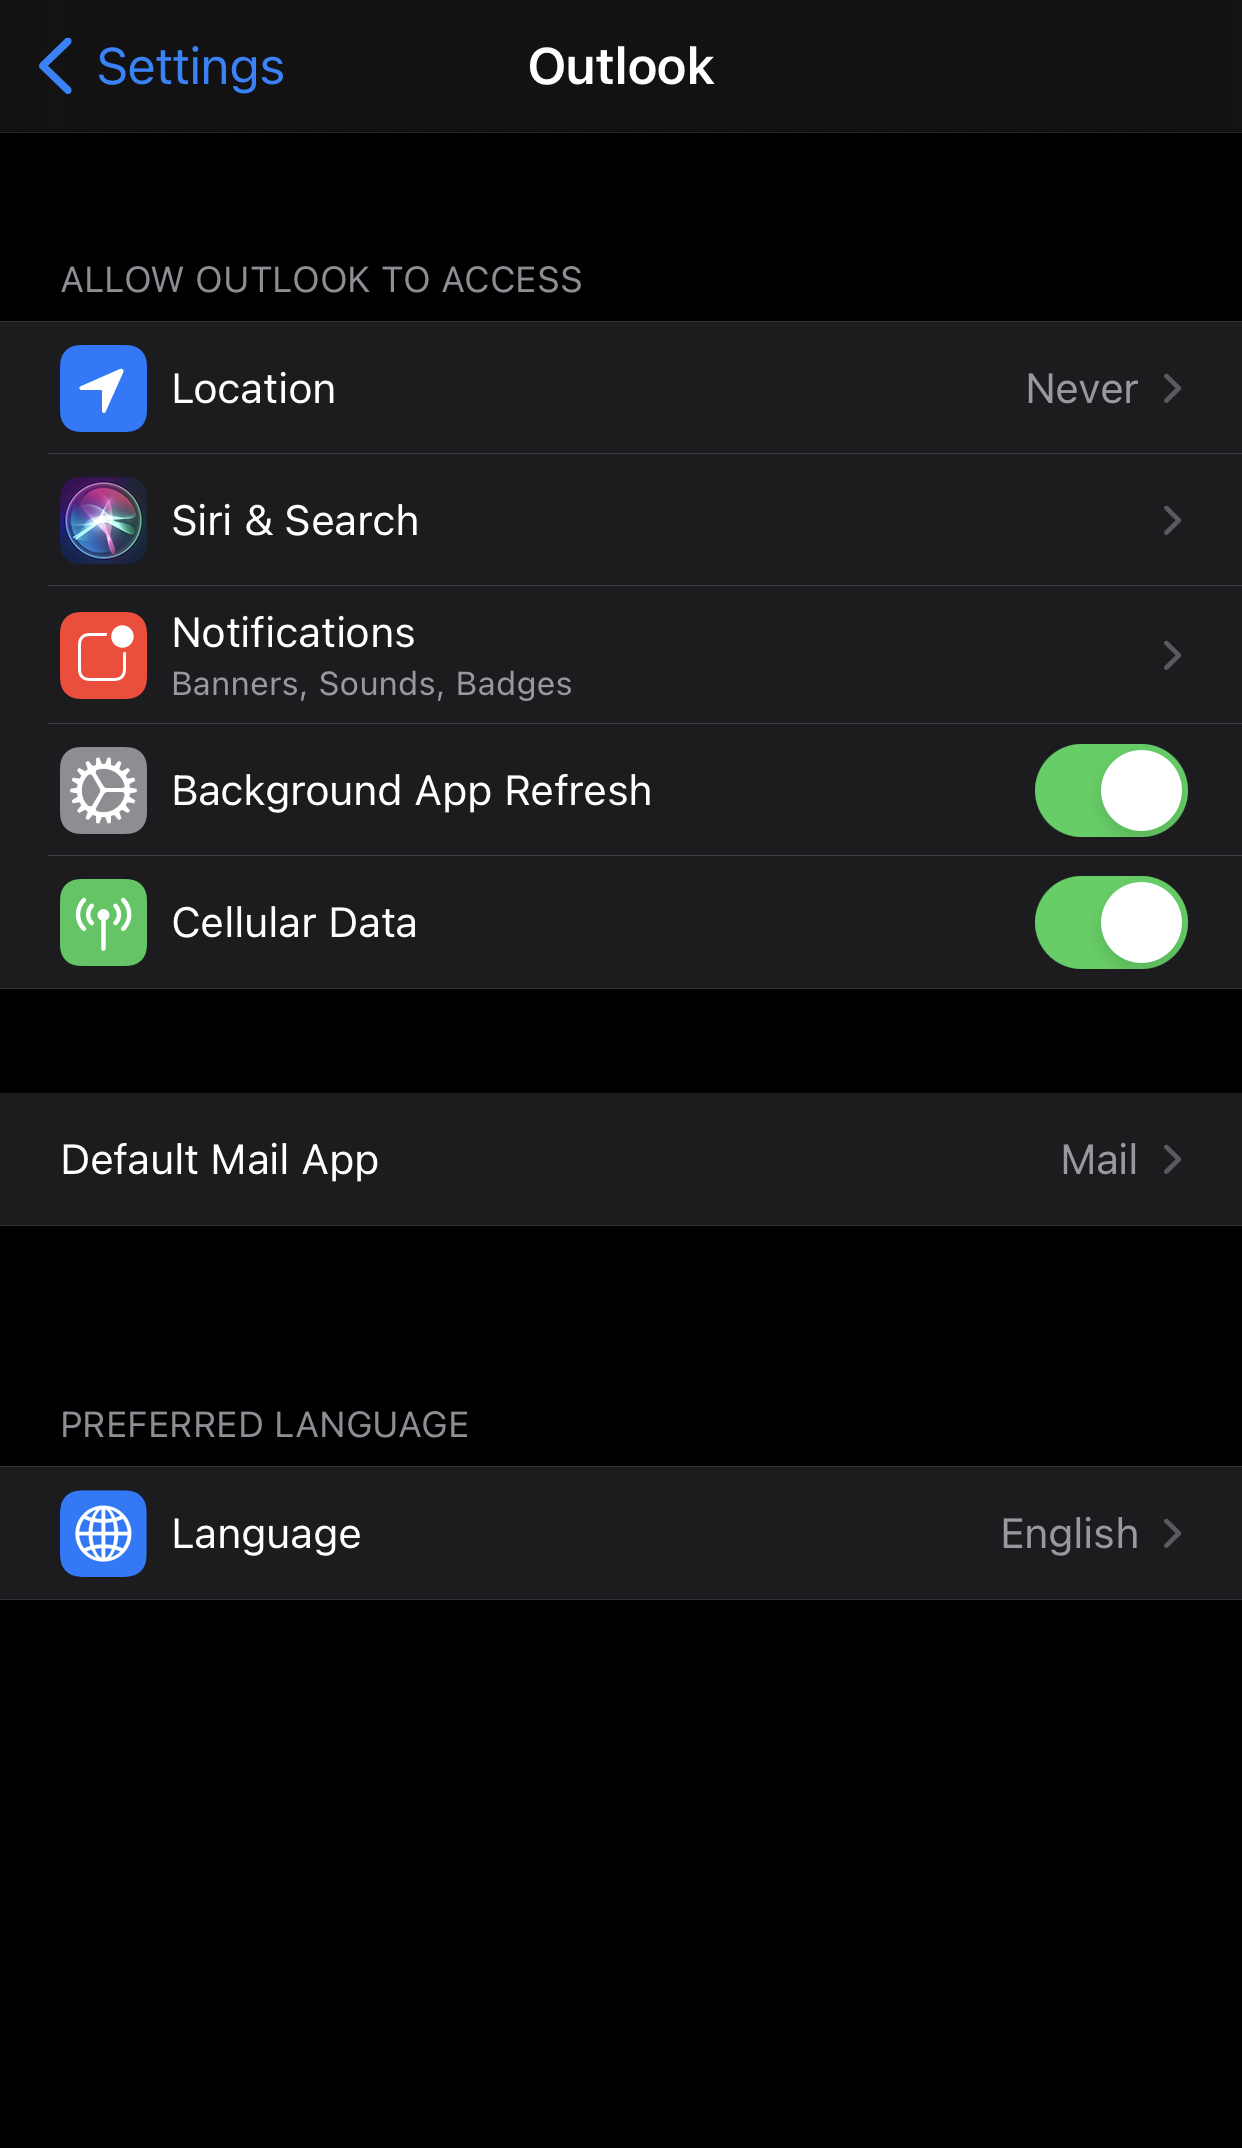 The mail permissions screen. The "Default Mail App" option is below the "Cellular Data" switch and above the "Preferred Language" option.